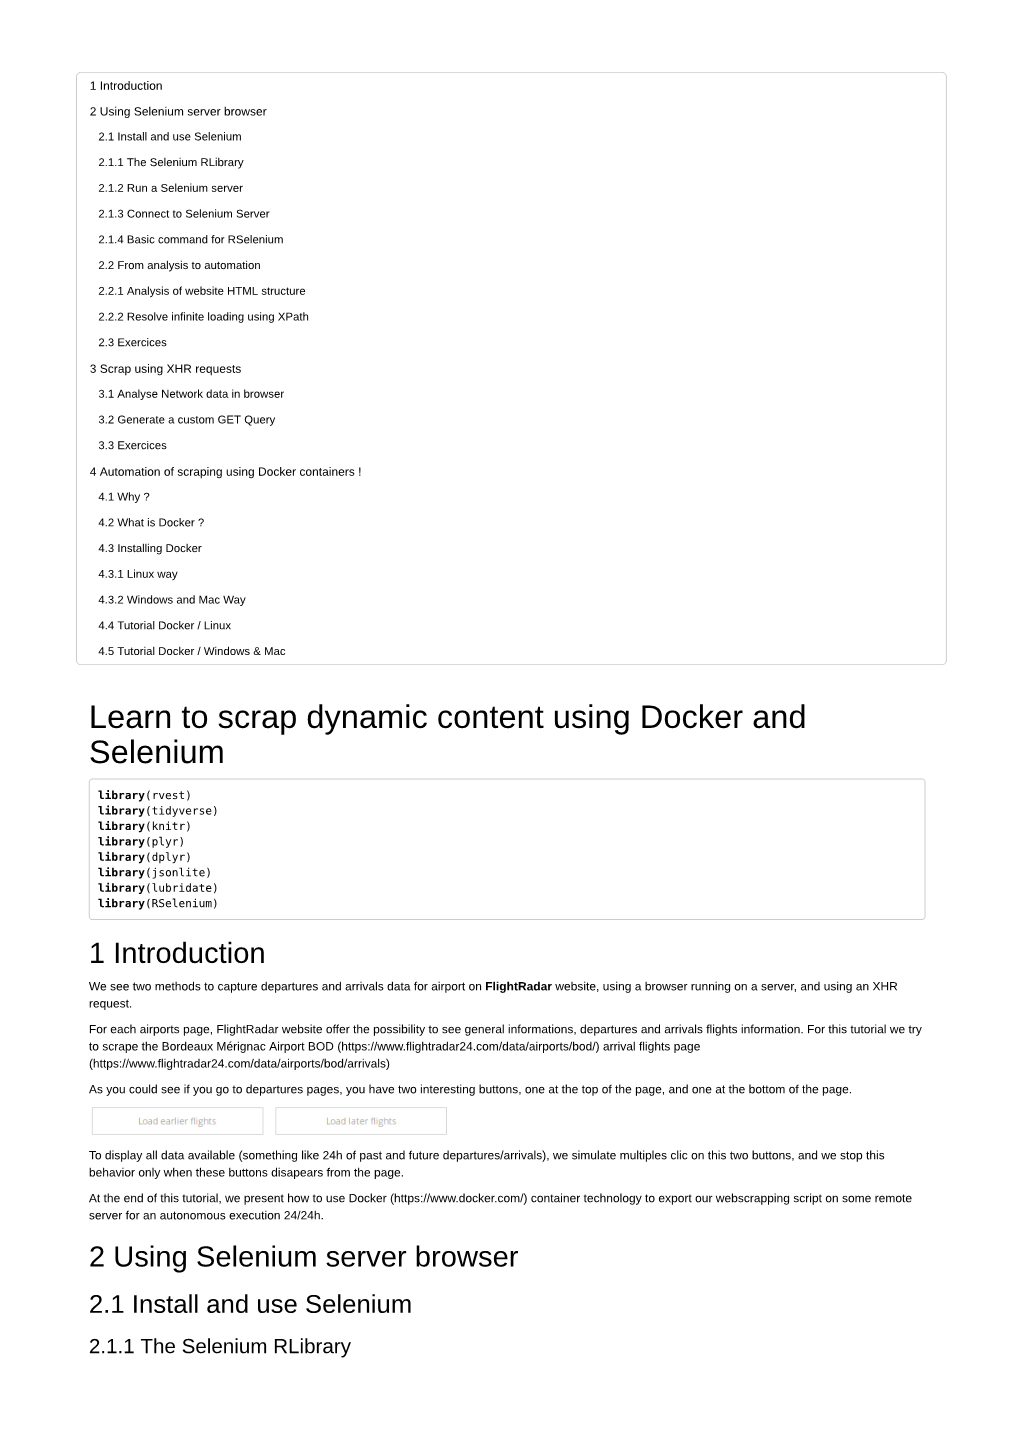 Learn to Scrap Dynamic Content Using Docker and Selenium